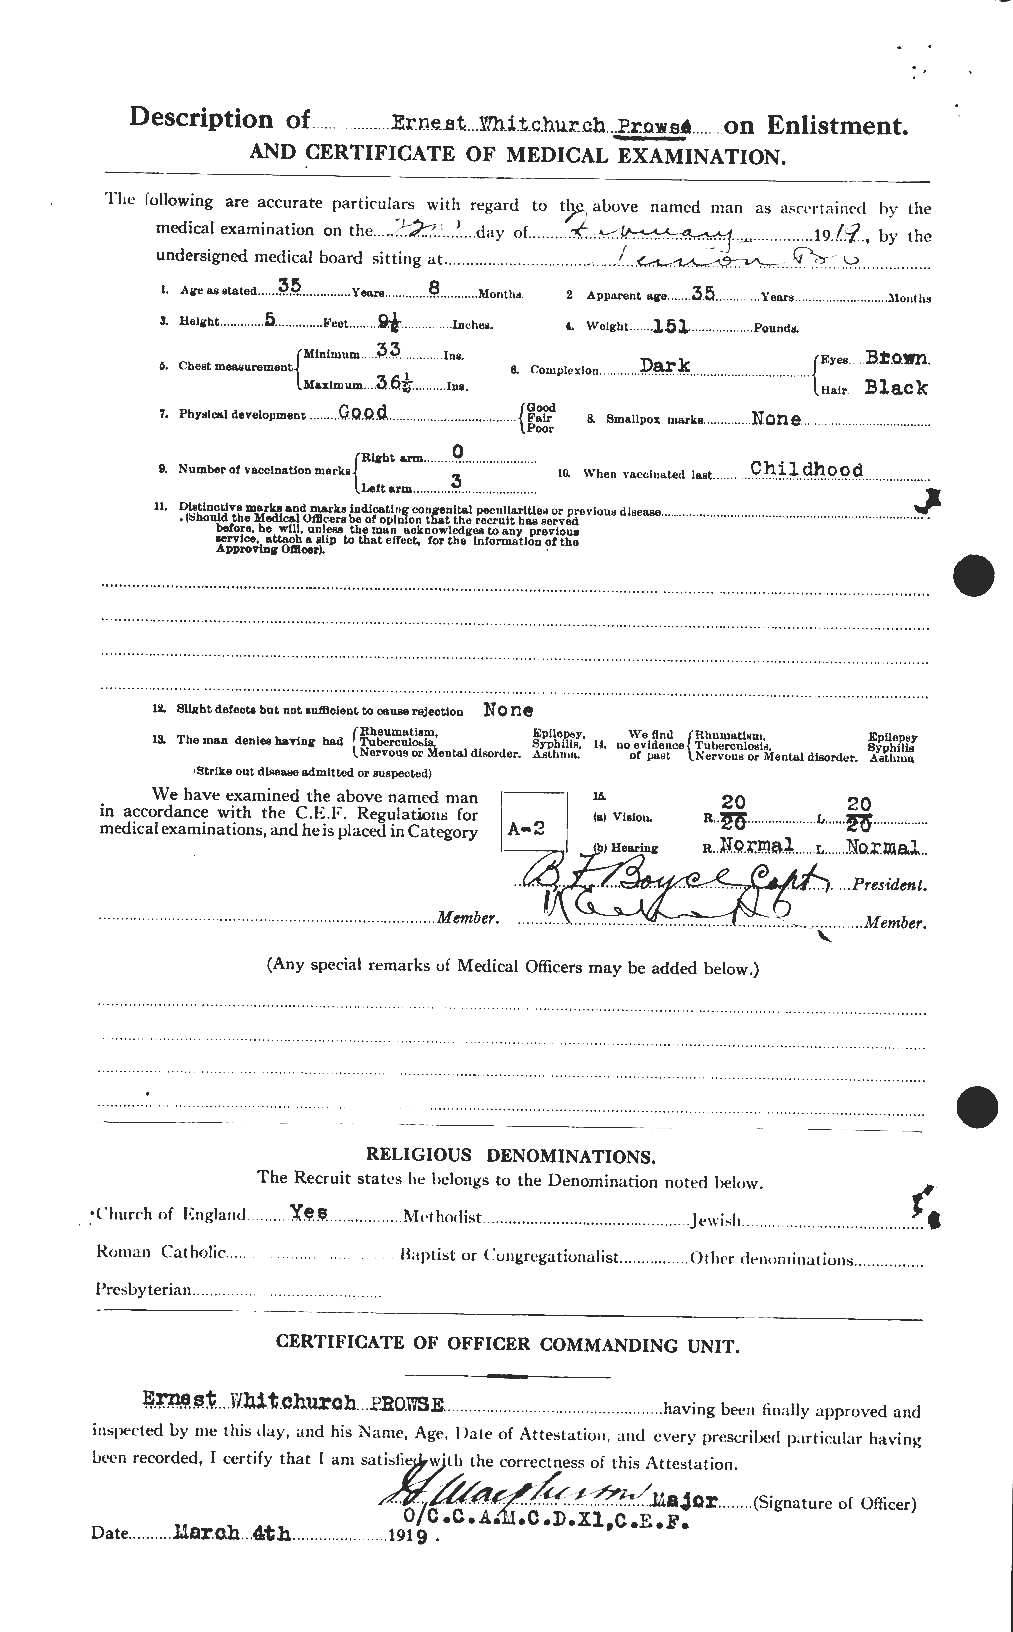 Personnel Records of the First World War - CEF 588731b